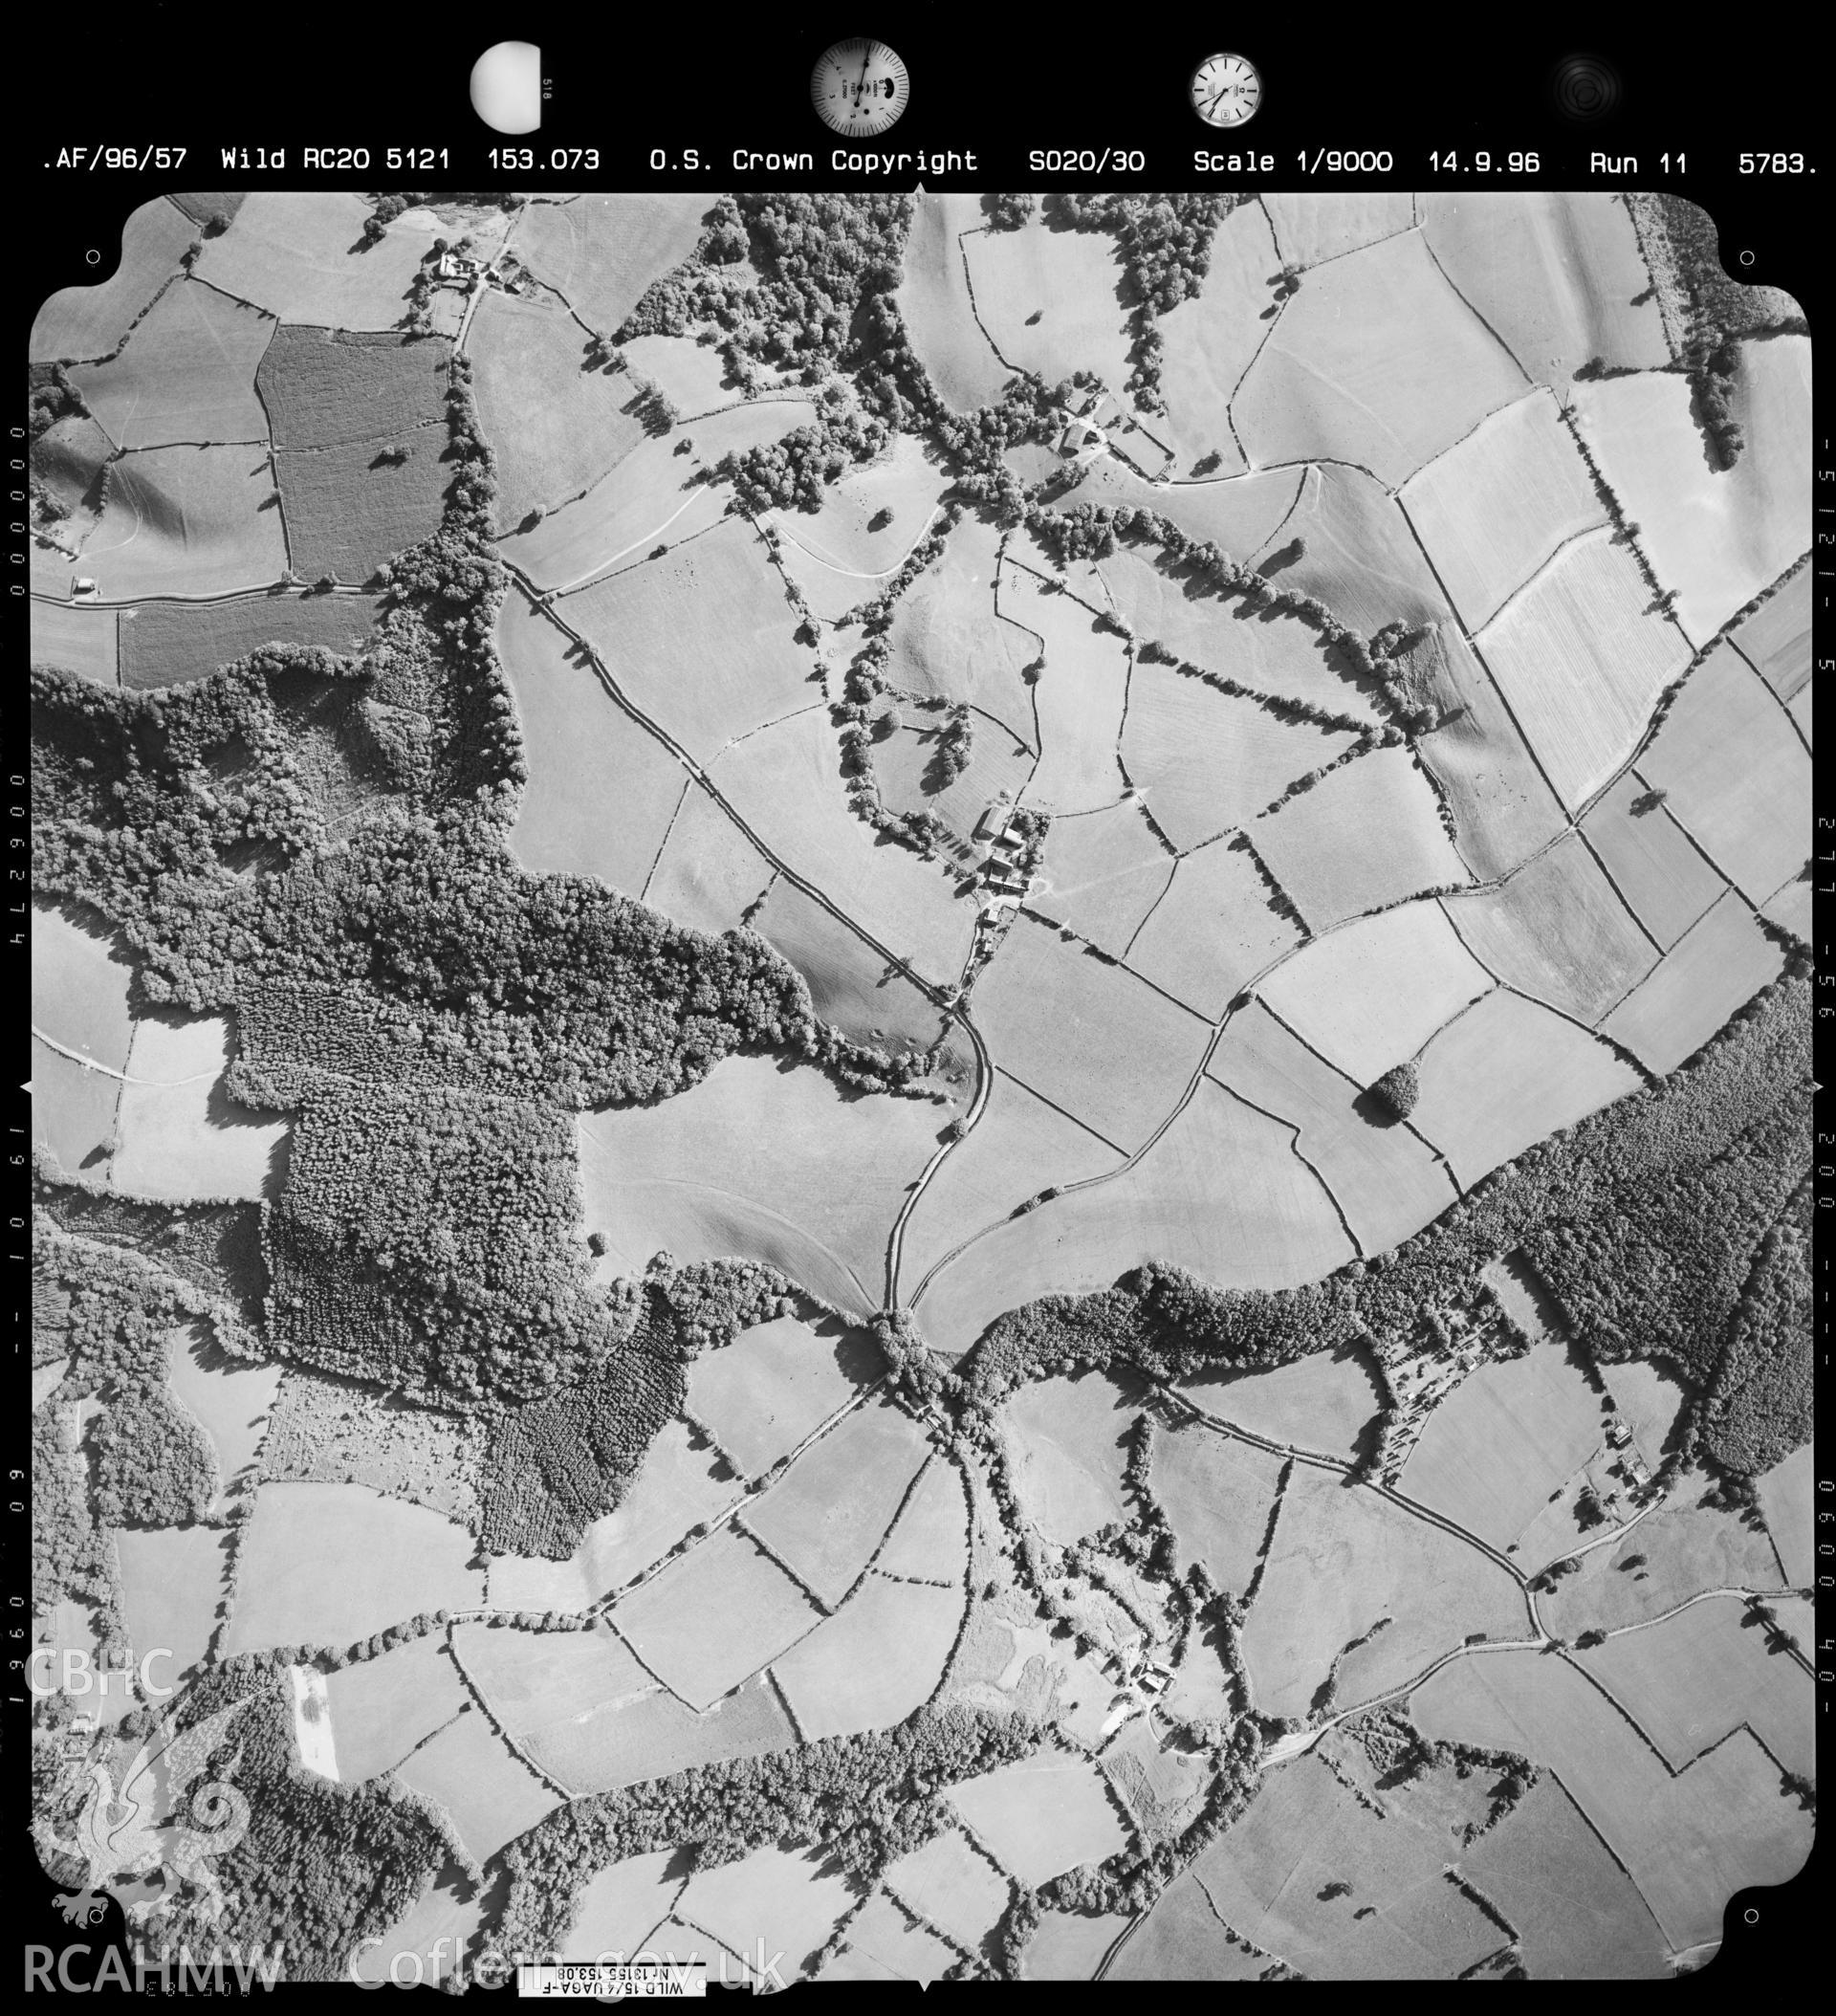 Digitized copy of an aerial photograph showing the area to the west of Llangibby Park, taken by Ordnance Survey, 1996.